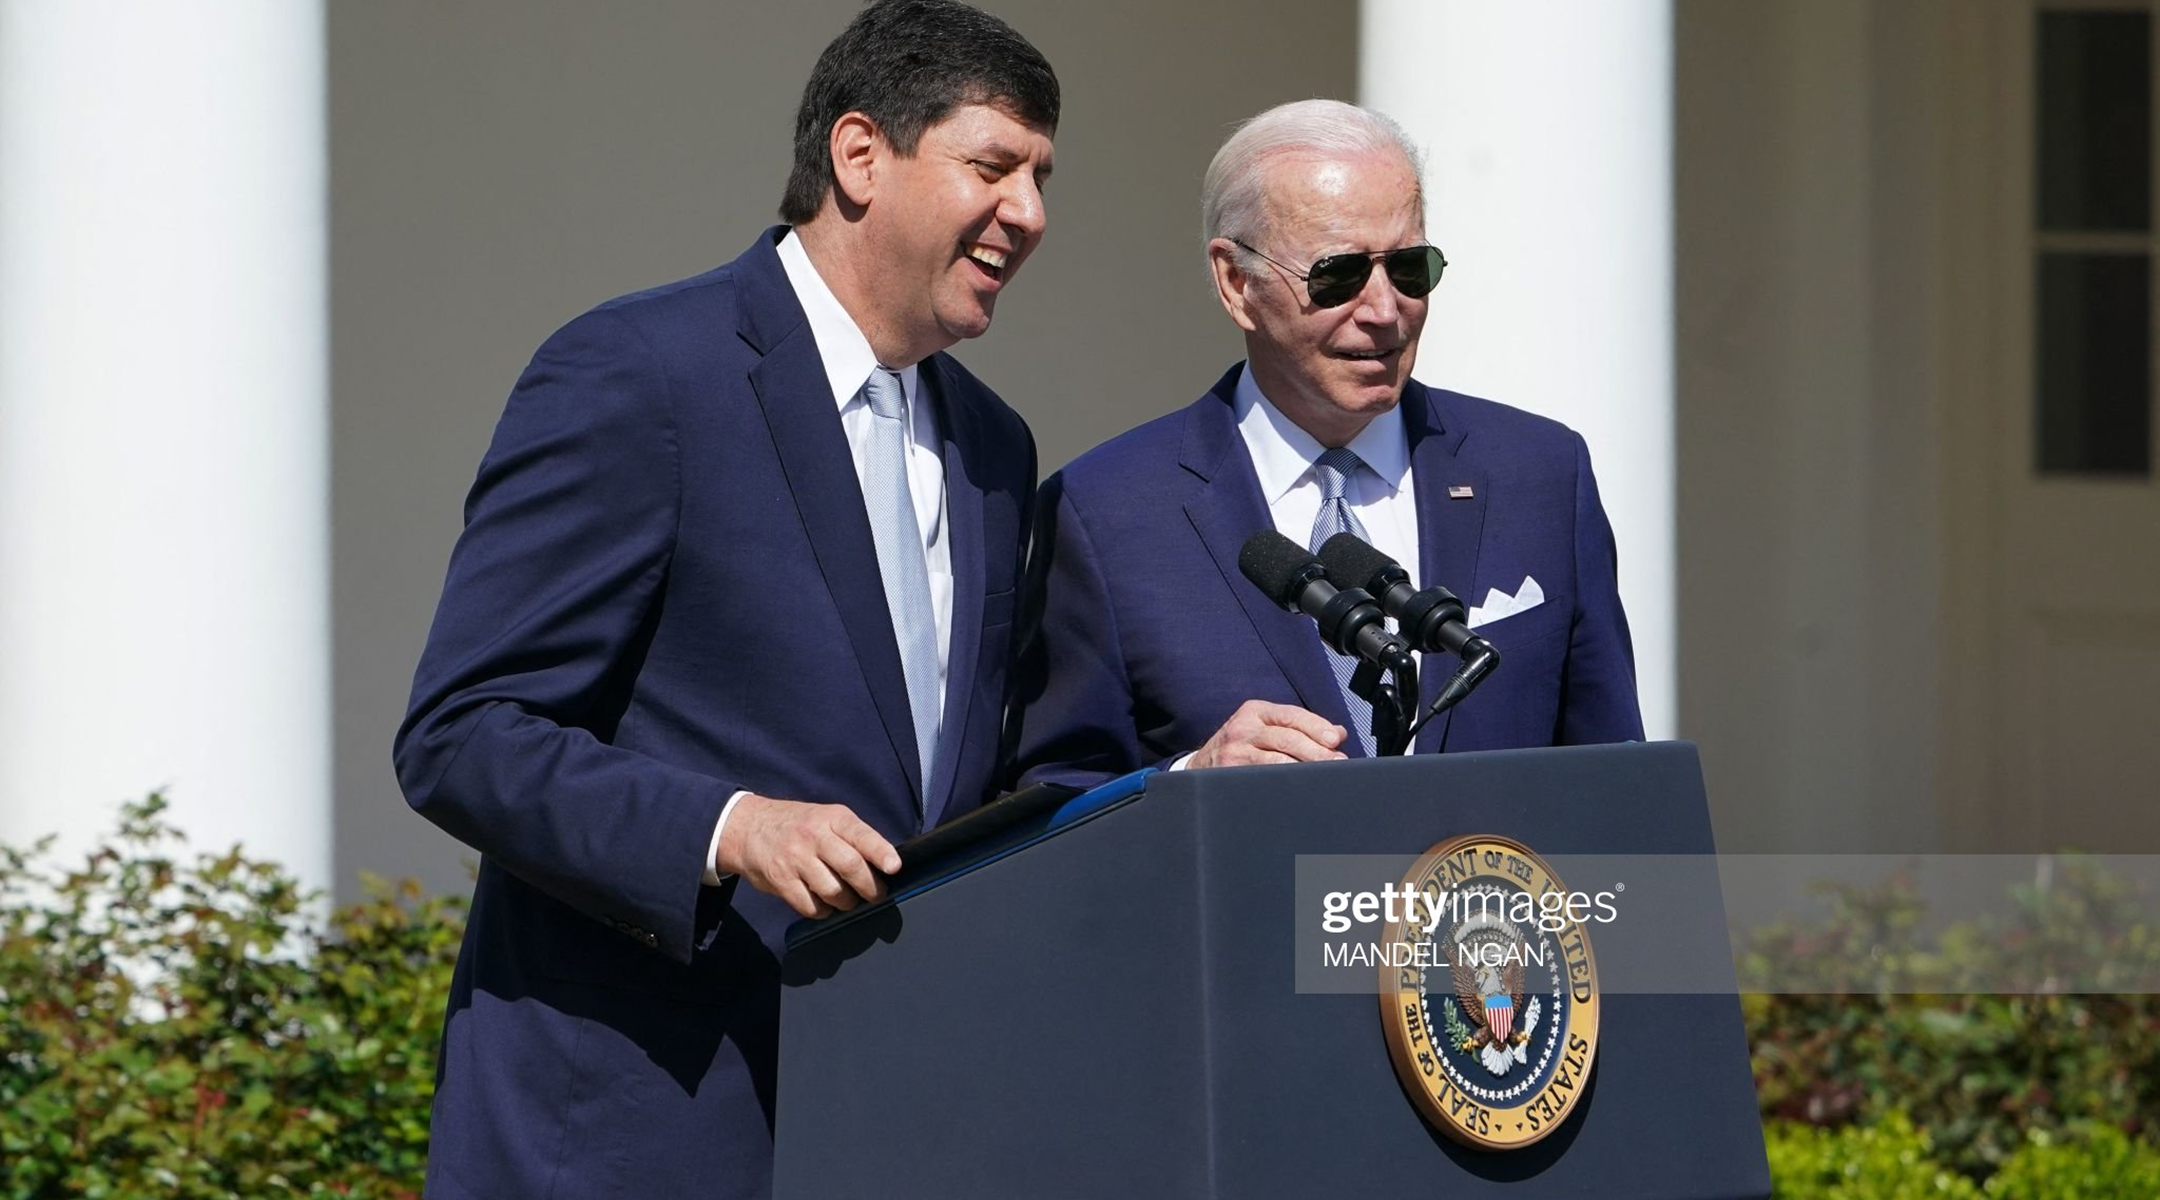 Steve Dettelbach, director of the Bureau of Alcohol, Tobacco, Firearms, and Explosives, being nominated for the position with President Joe Biden in the White House Rose Garden in Washington, D.C., April 11, 2022. (Mandel Ngan/AFP via Getty Images)